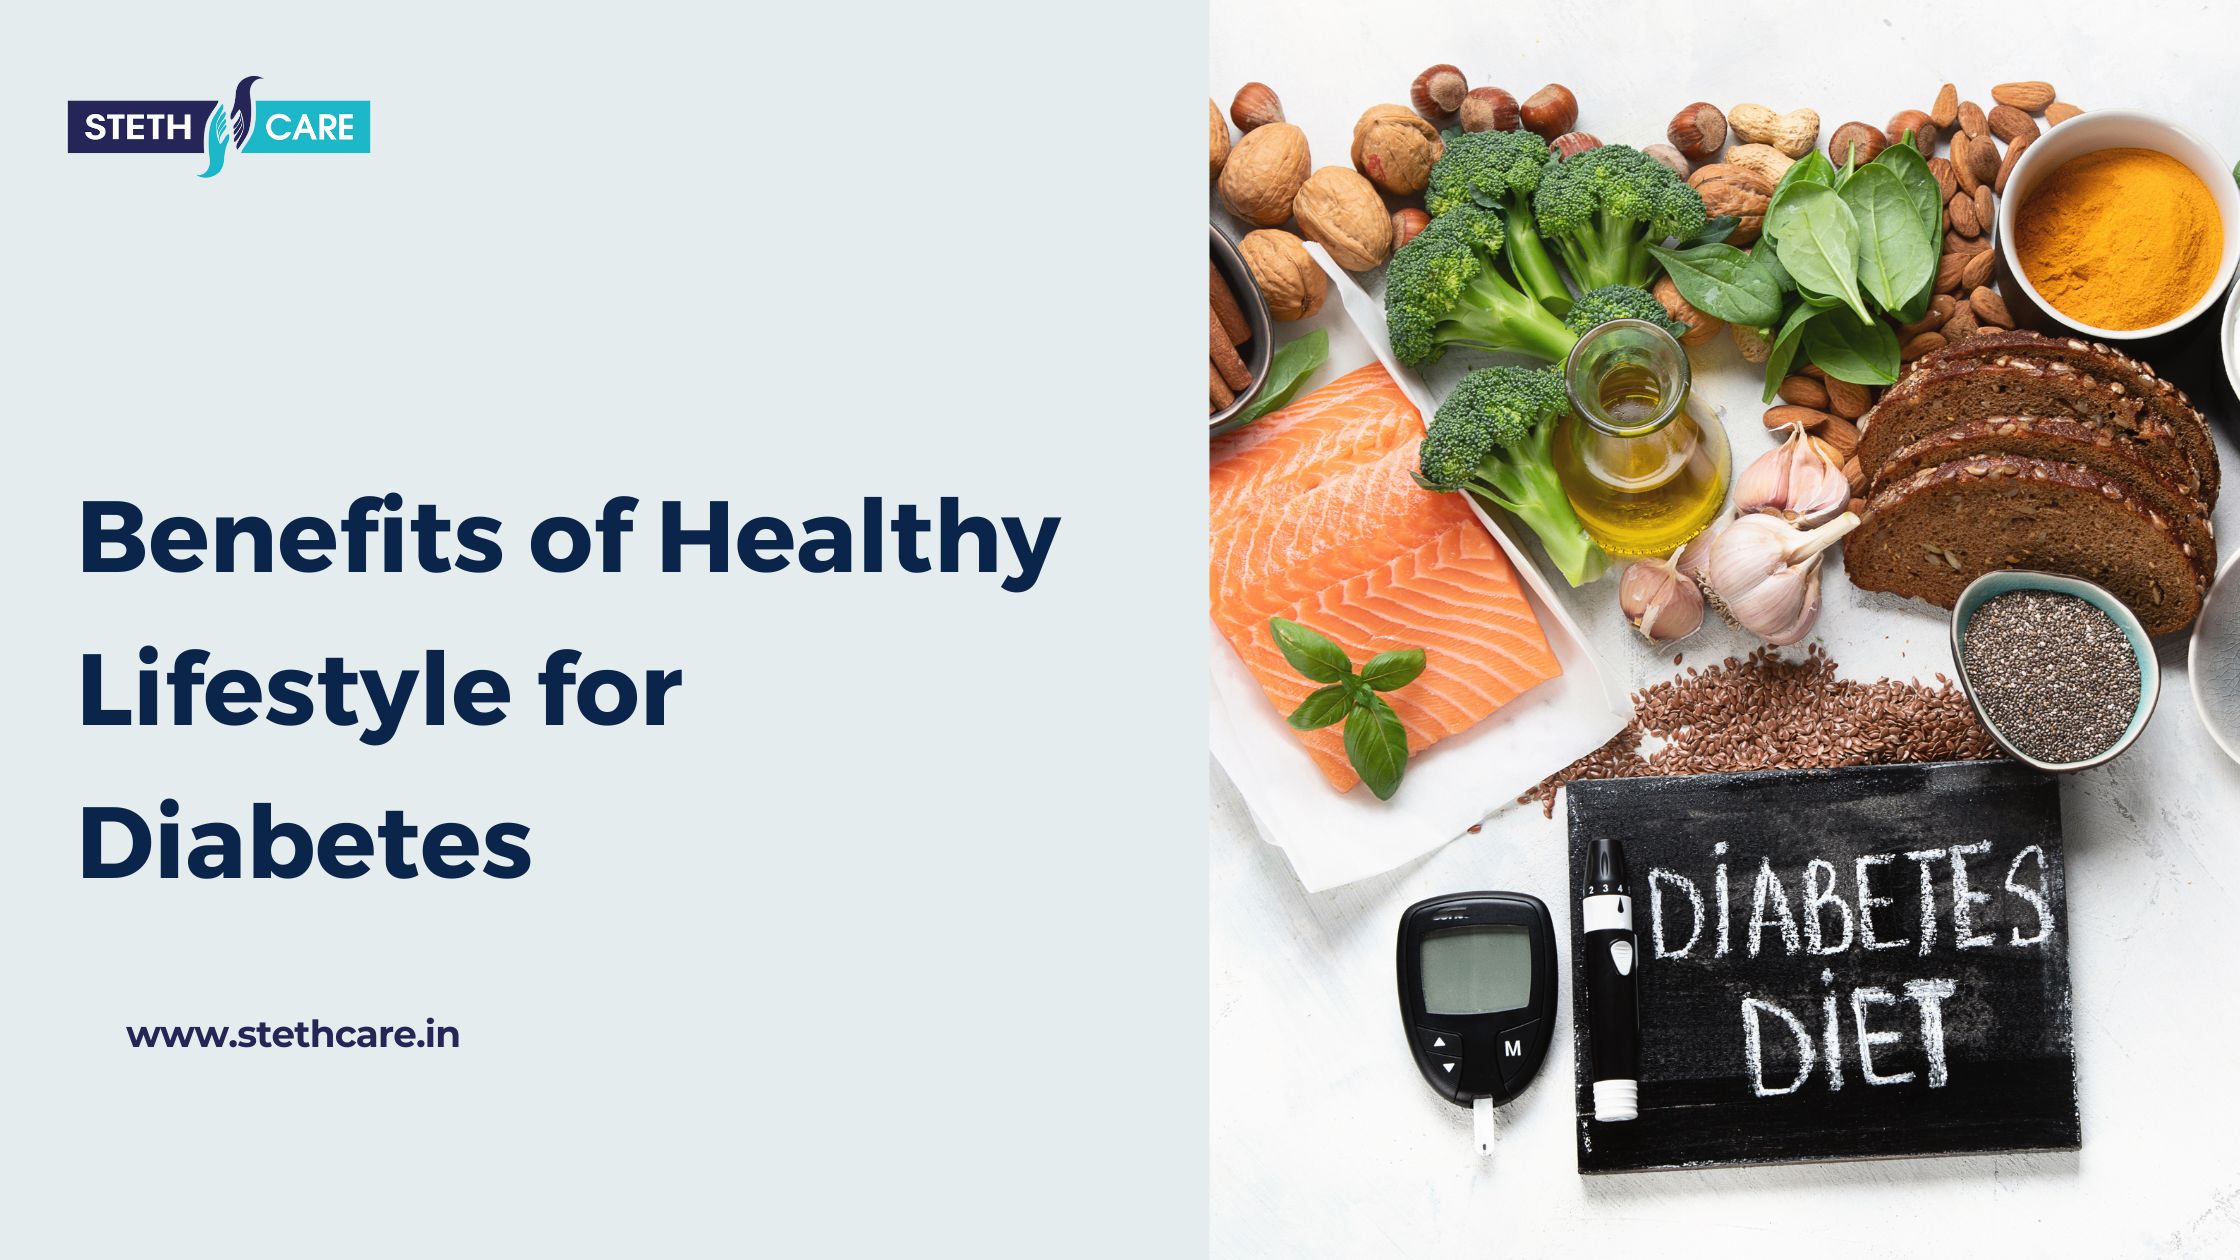 Benefits of Healthy Lifestyle for Diabetes